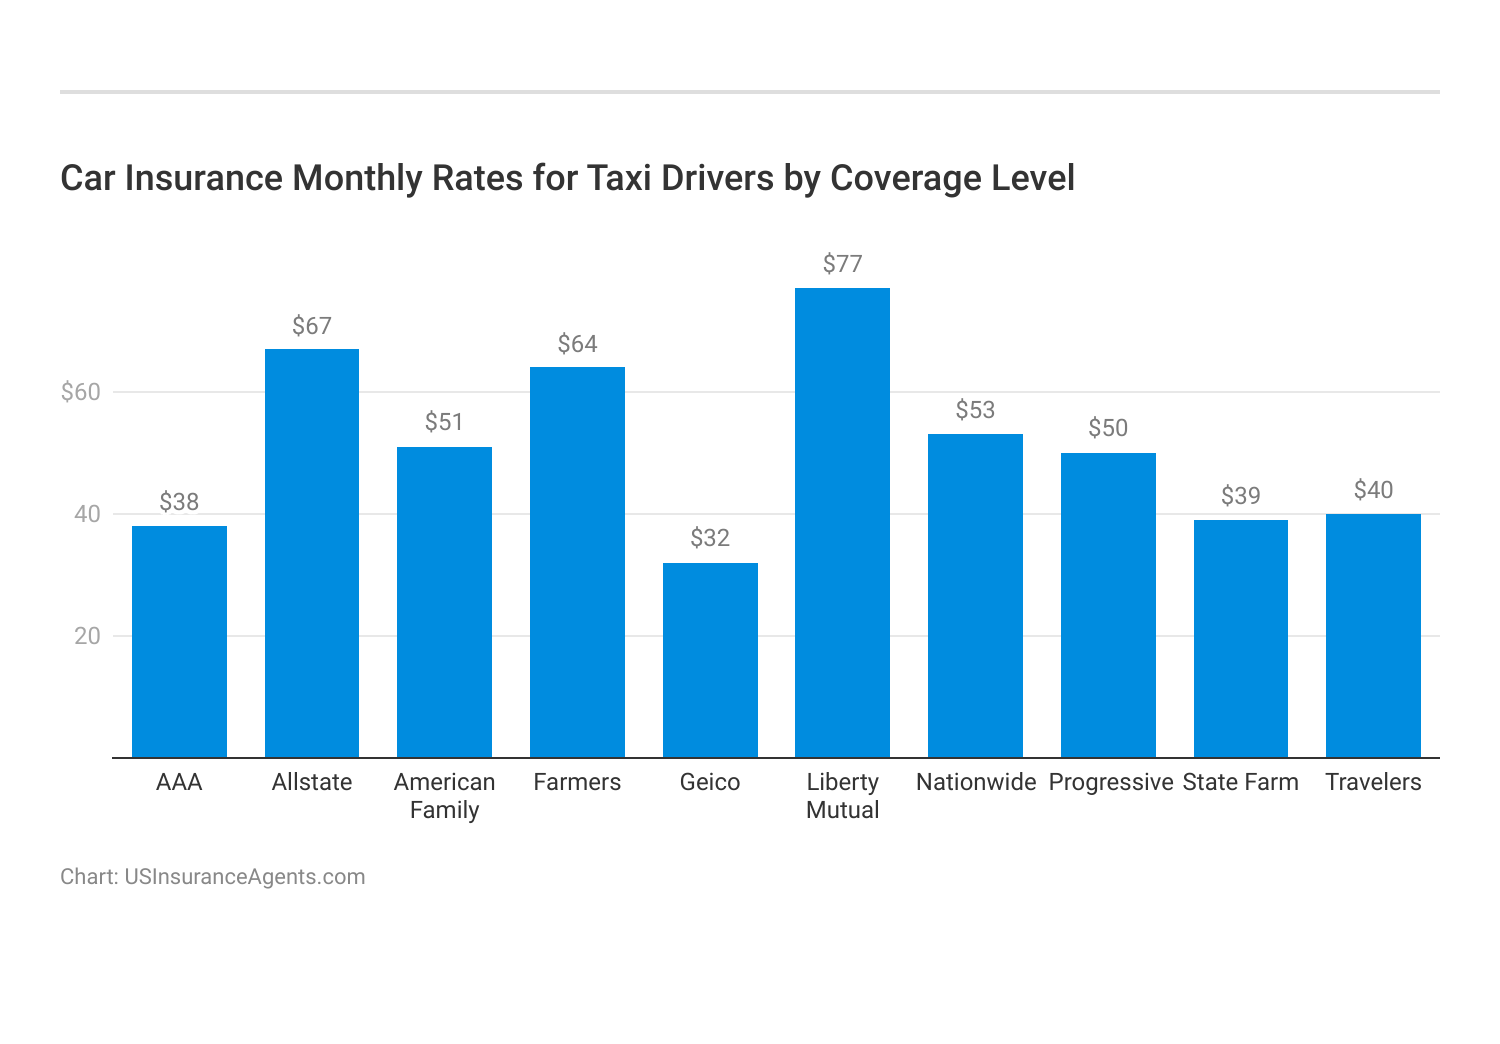 <h3>Car Insurance Monthly Rates for Taxi Drivers by Coverage Level</h3>